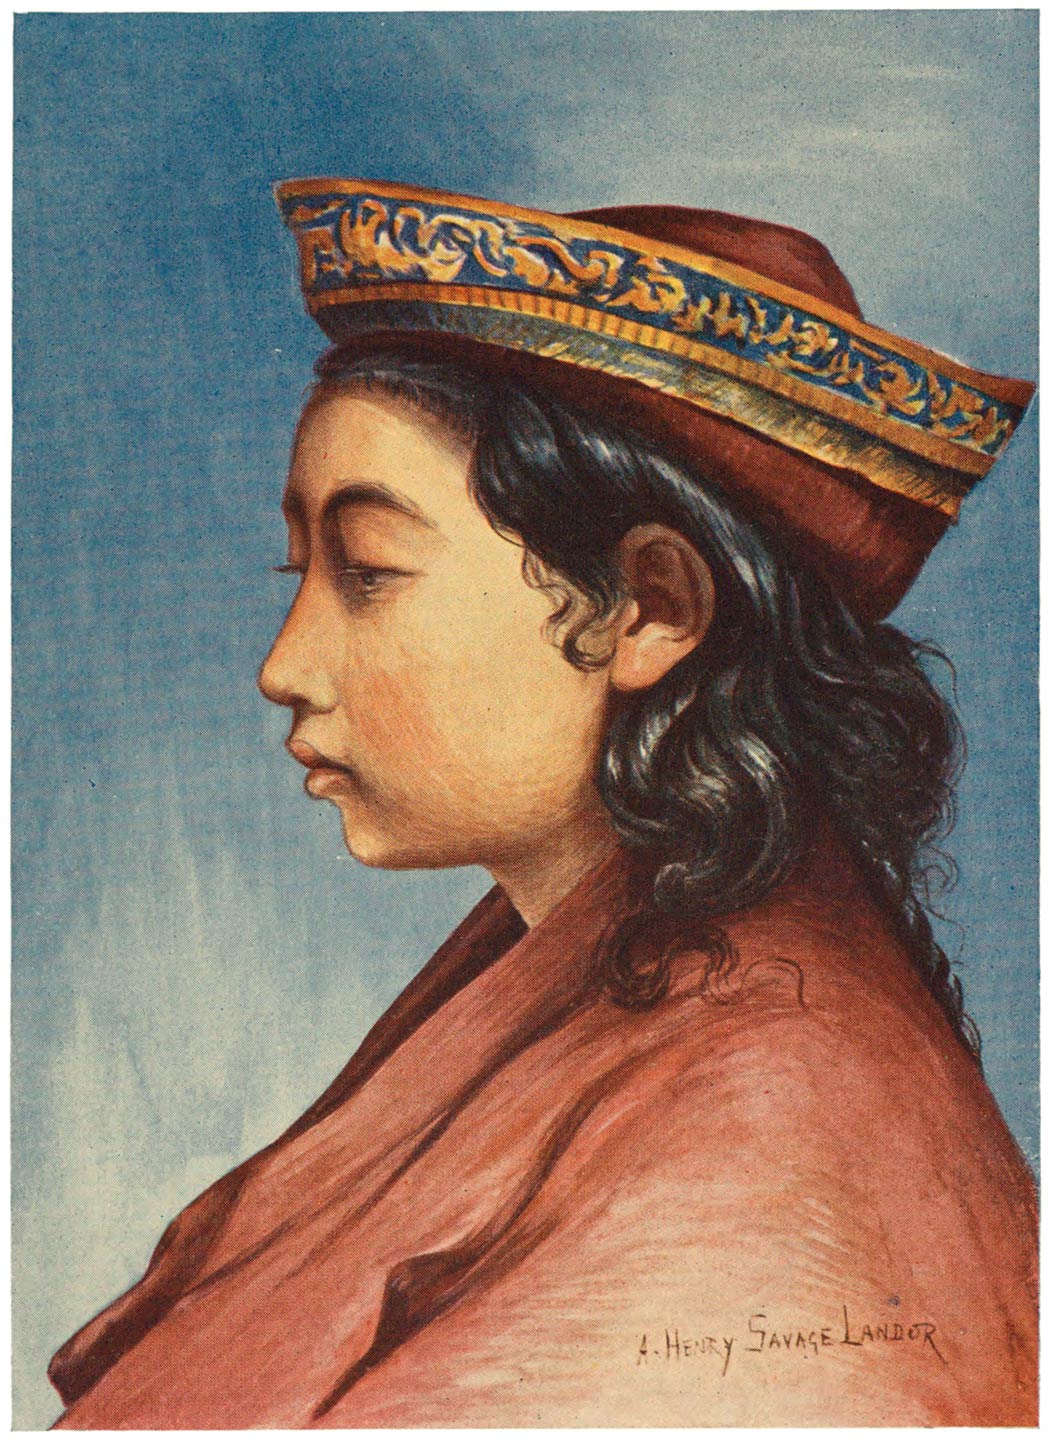 Tibetan Boy in his Gold-embroidered Hat